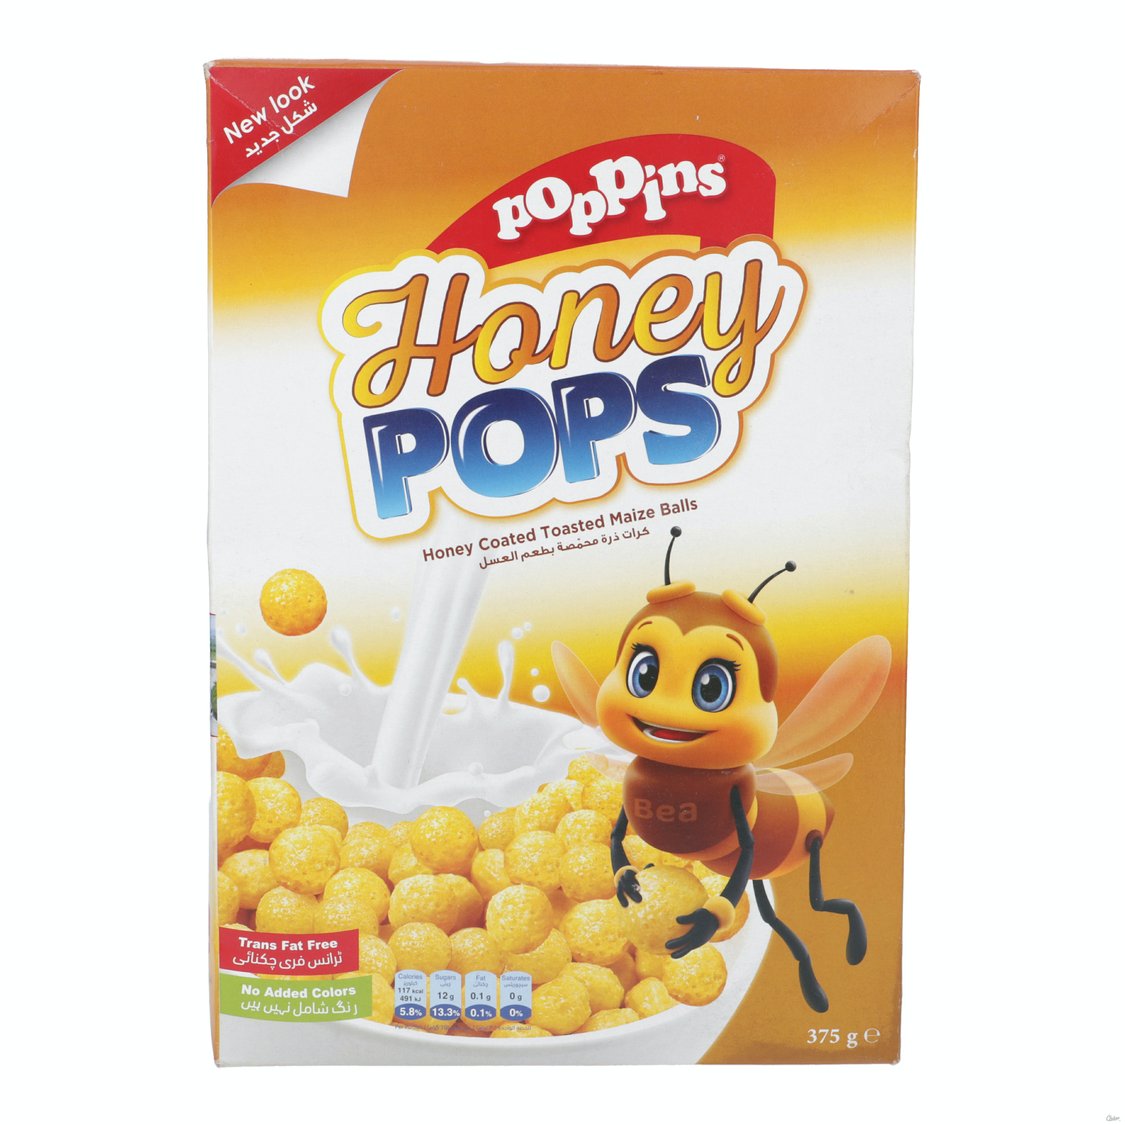 Buy Poppins Pops Honey Coated Toasted Maize Balls 375g Online in Pakistan - Tee Emm Mart